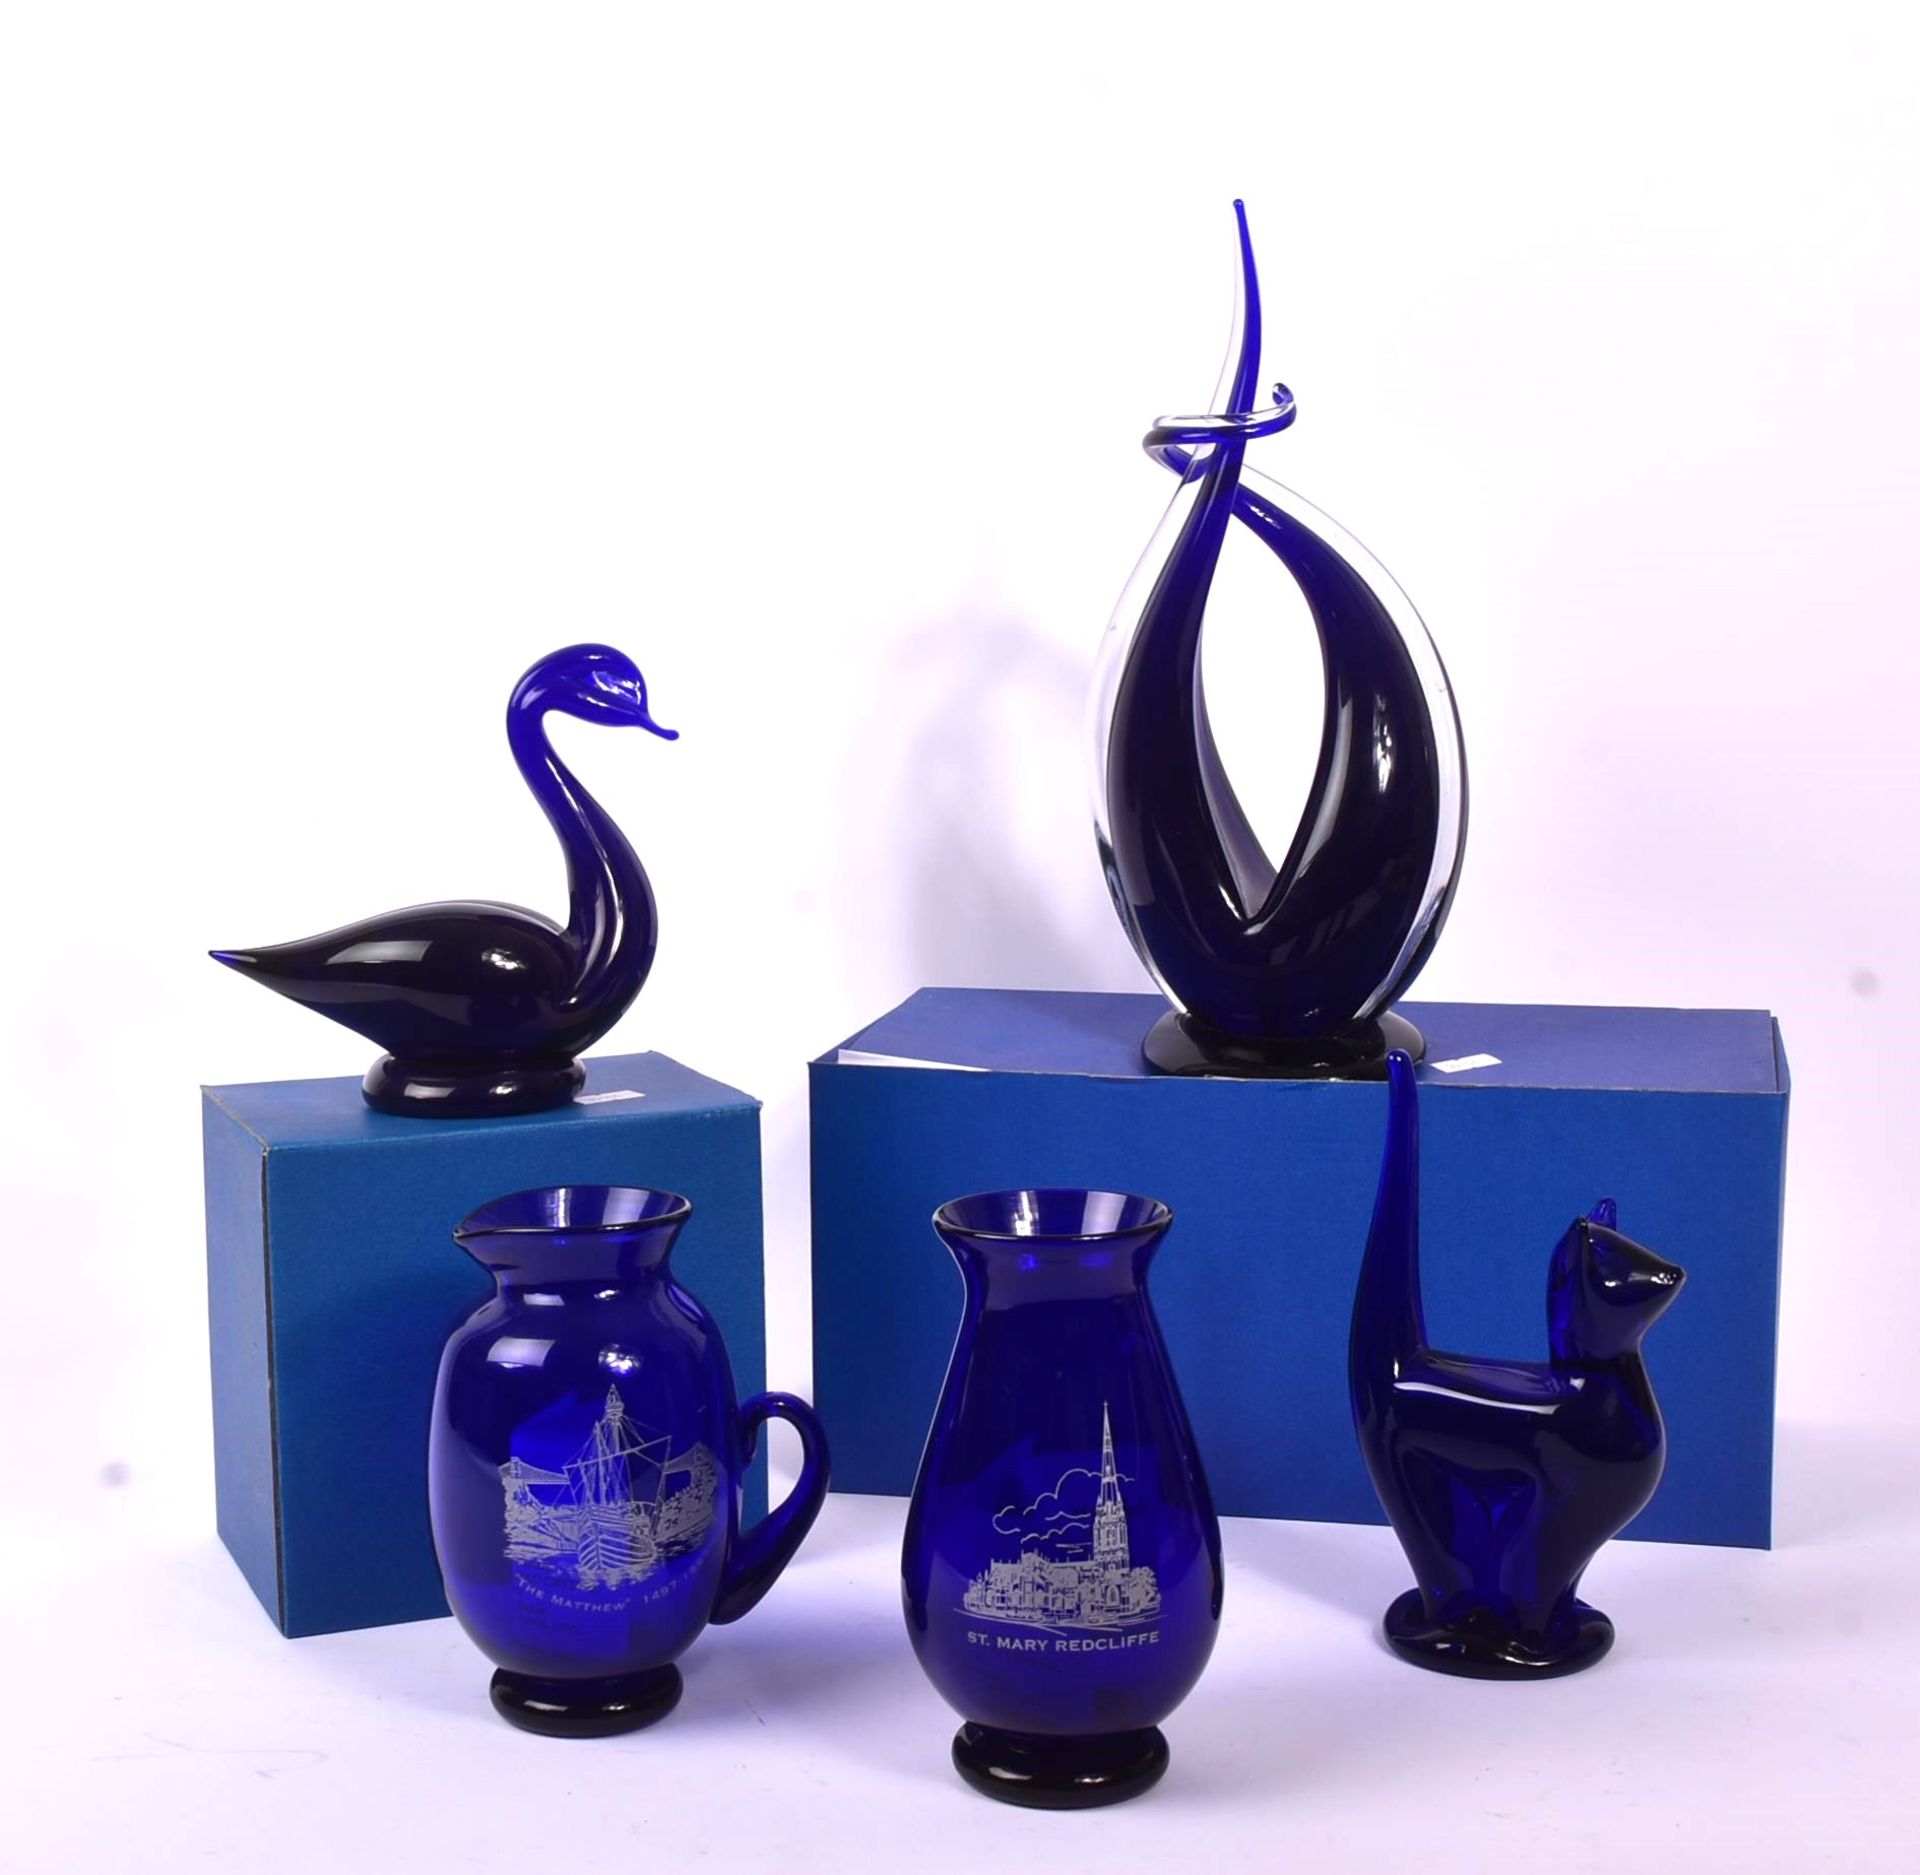 BRISTOL BLUE - COLLECTION OF CONTEMPORARY GLASS ITEMS